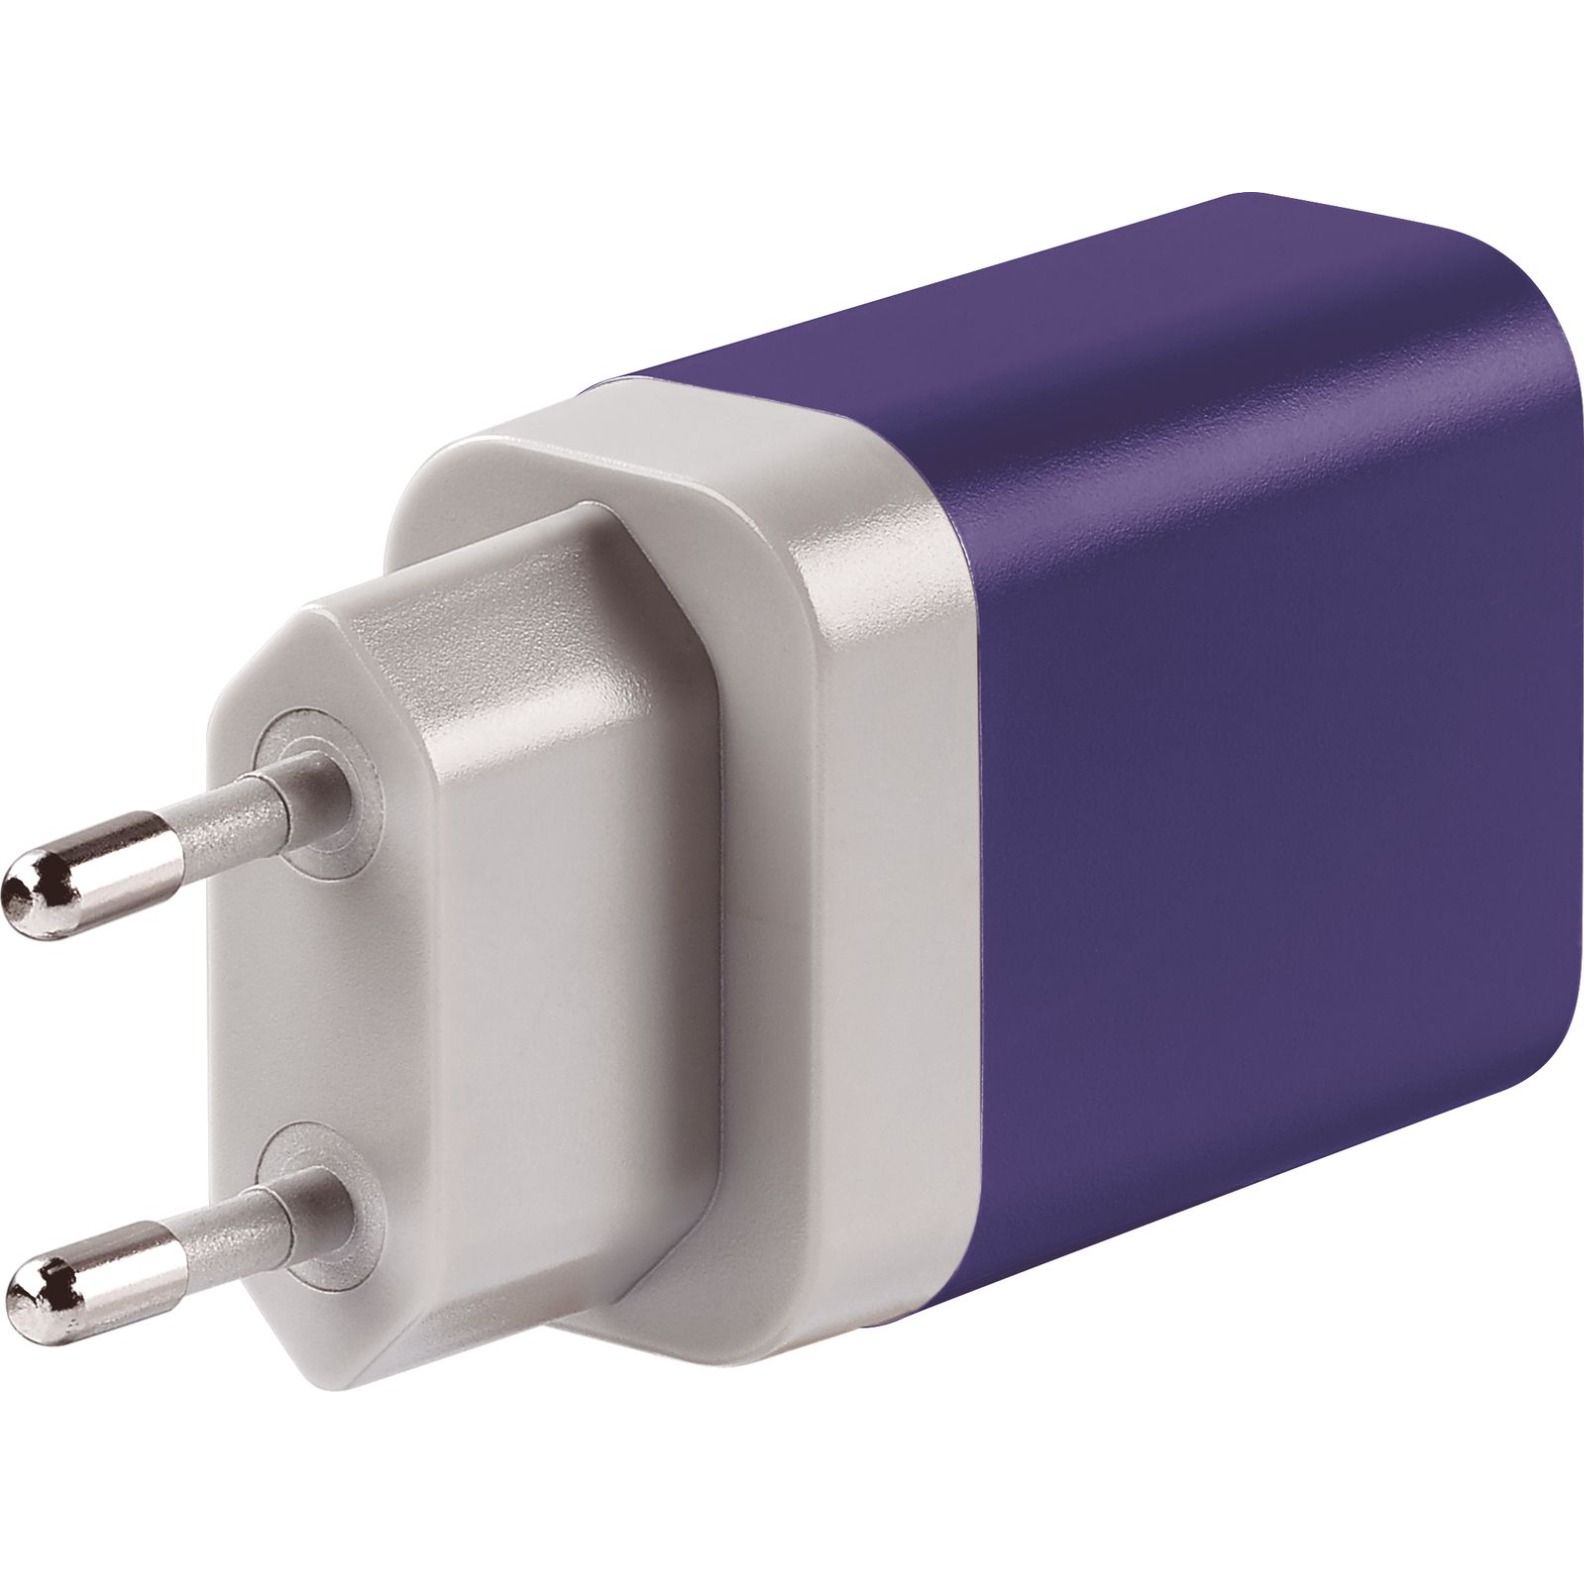 Worldwide USB-A & USB-C Charger